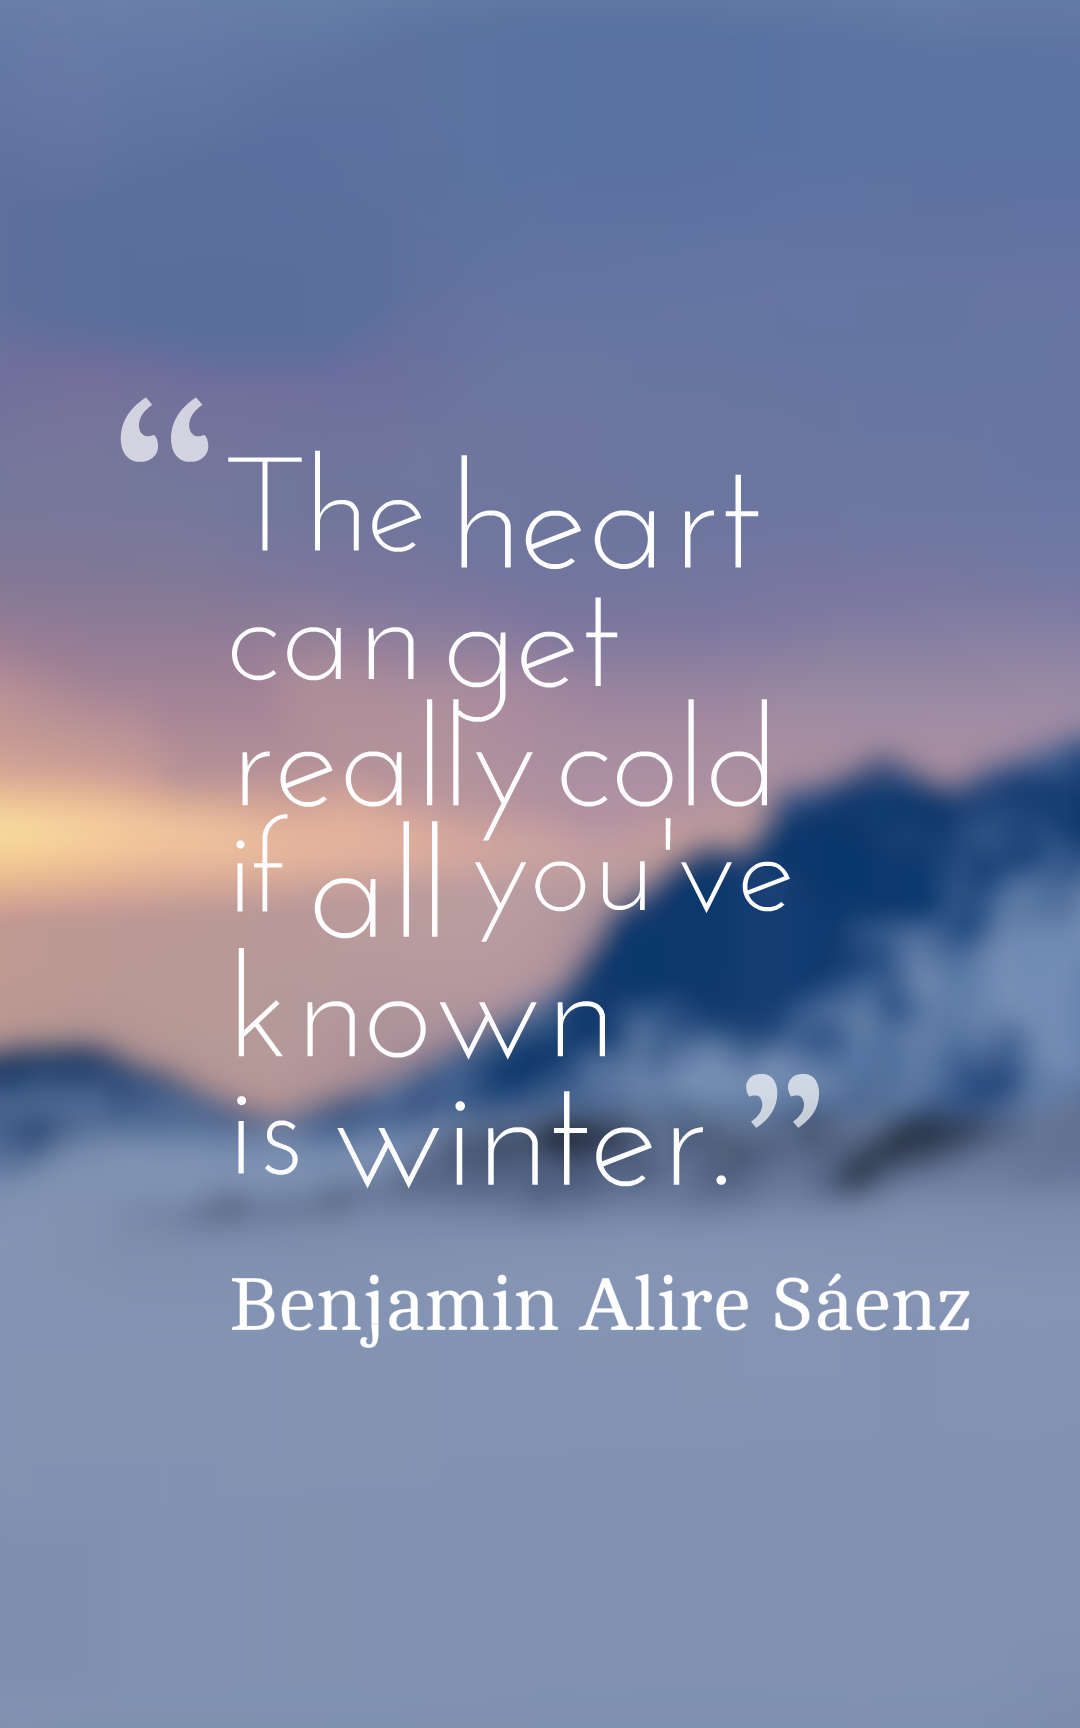 The heart can get really cold if all you've known is winter.